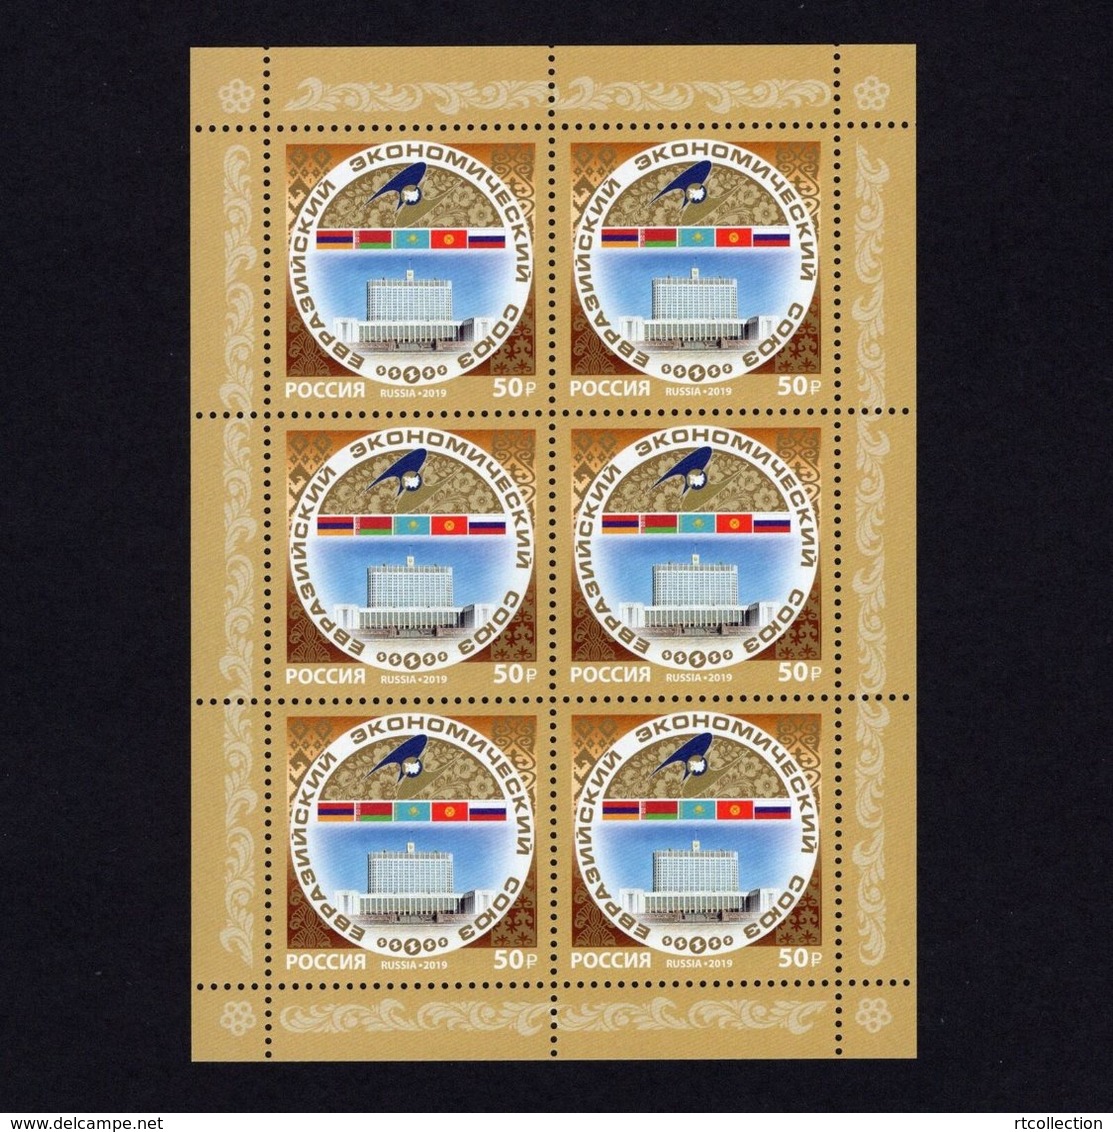 Russia 2019 Sheet 5th Anniversary Eurasian Economic Union Flag Organization Bird Architecture Celebrations Stamps MNH - Stamps